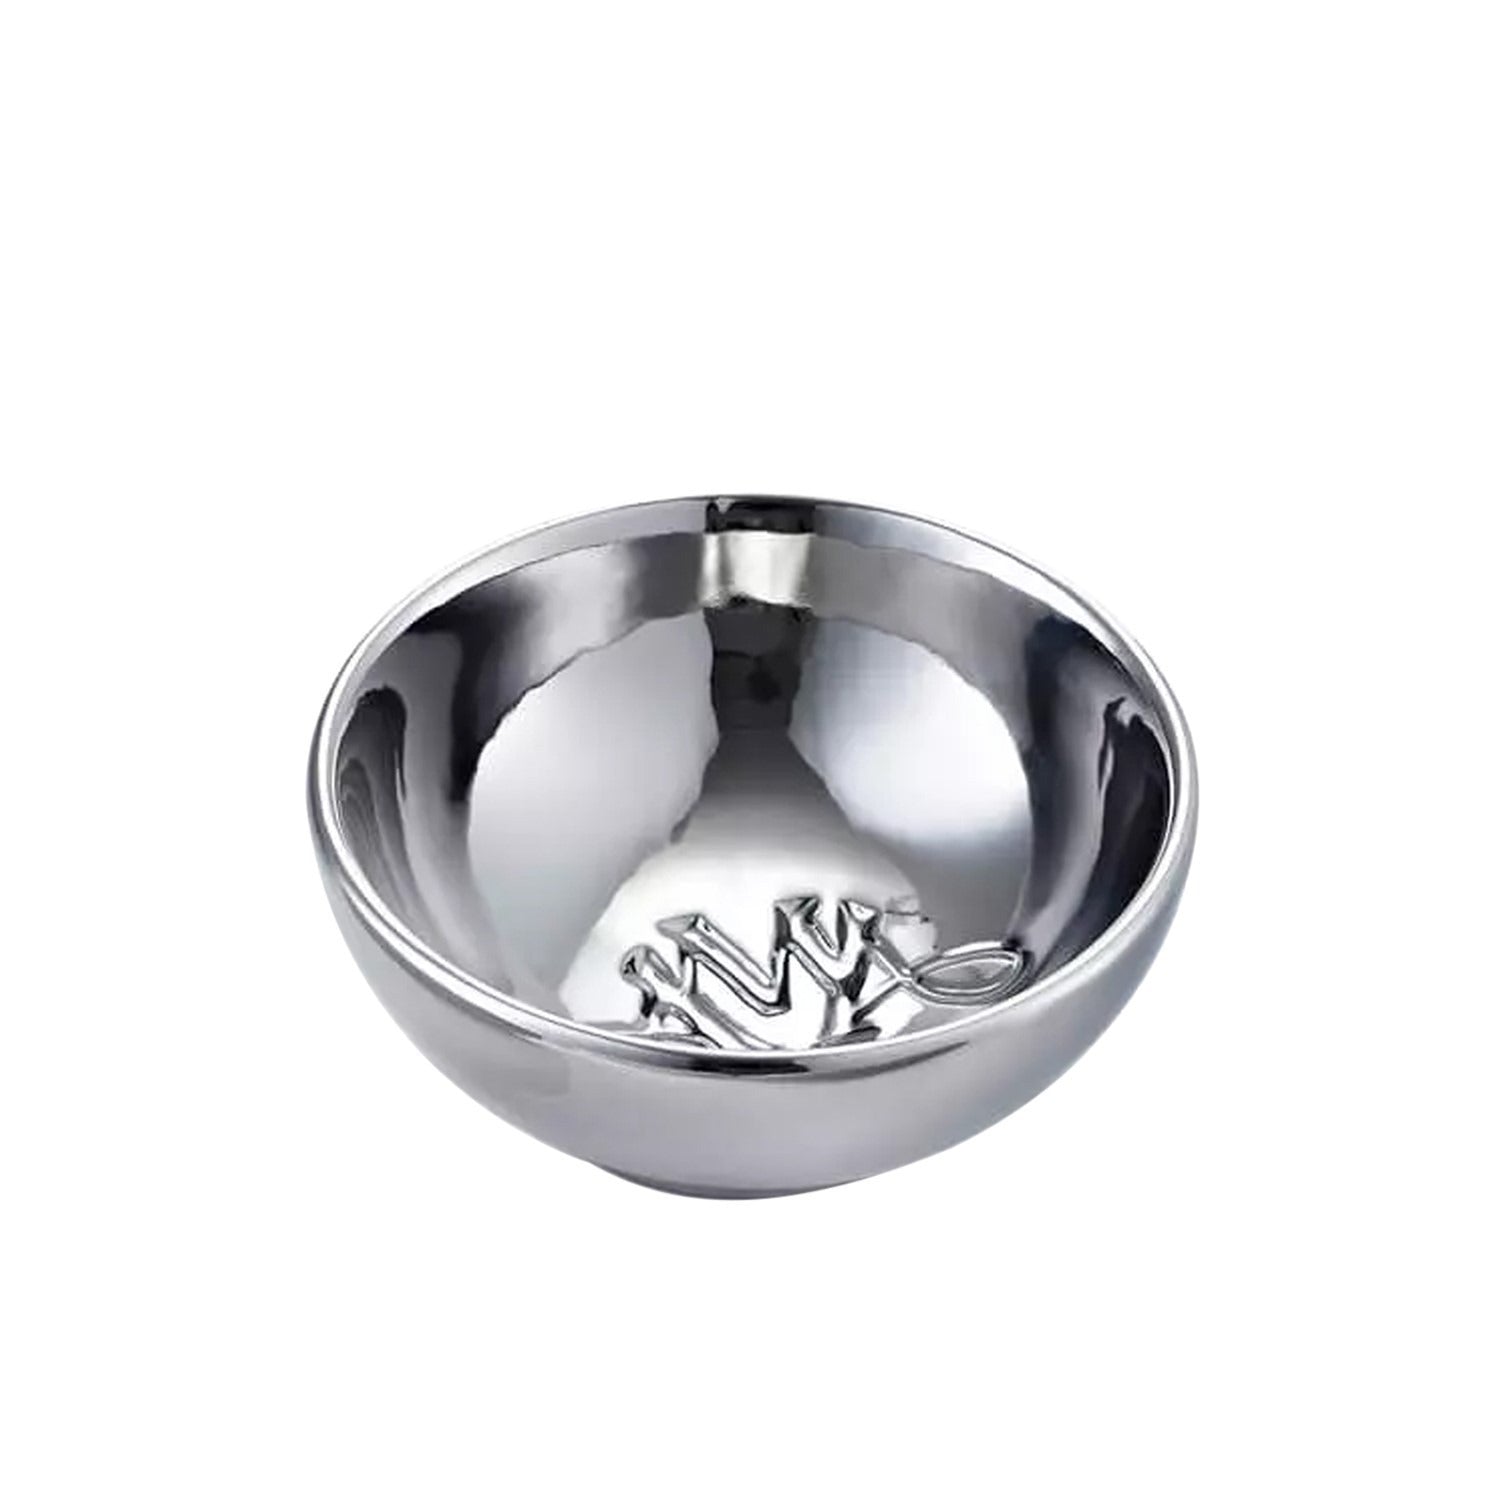 View Ava May Oval Burner Bowl Chrome information